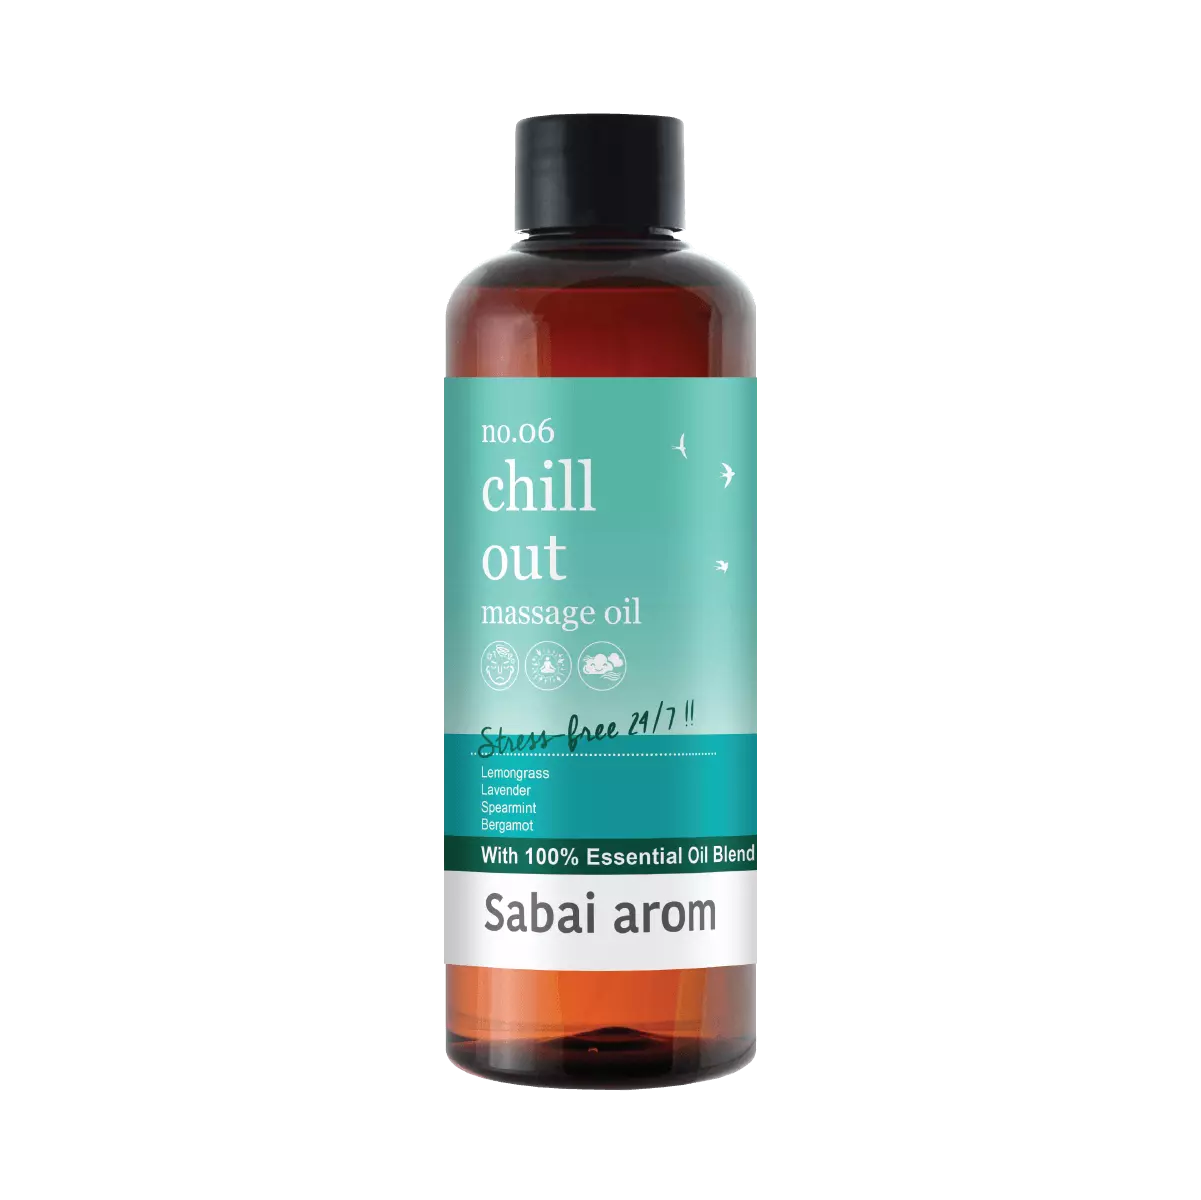 chill out massage oil 200ml <h2>In a deep relaxing base of 7 natural oils,</h2> Stress Away Massage Oil is enriched with vitamins, antioxidants and Omega fatty acids tinted wonderfully with a relaxing blend of Lemongrass, Lavender, Spearmint, Bergamot, Eucalyptus and Cornmint pure essential oils. It is a good way to untie mental and physical knots. Best to ask someone near and dear give you comfort touches. <strong>Scent</strong> : The spontaneous refreshing of Mints and Bergamot combined with the deepness of Lavender to instantly untie the bond of tension, making you feel rejuvenated and light-hearted like taking a fine walk among a herbal-floral field on a high mountain.